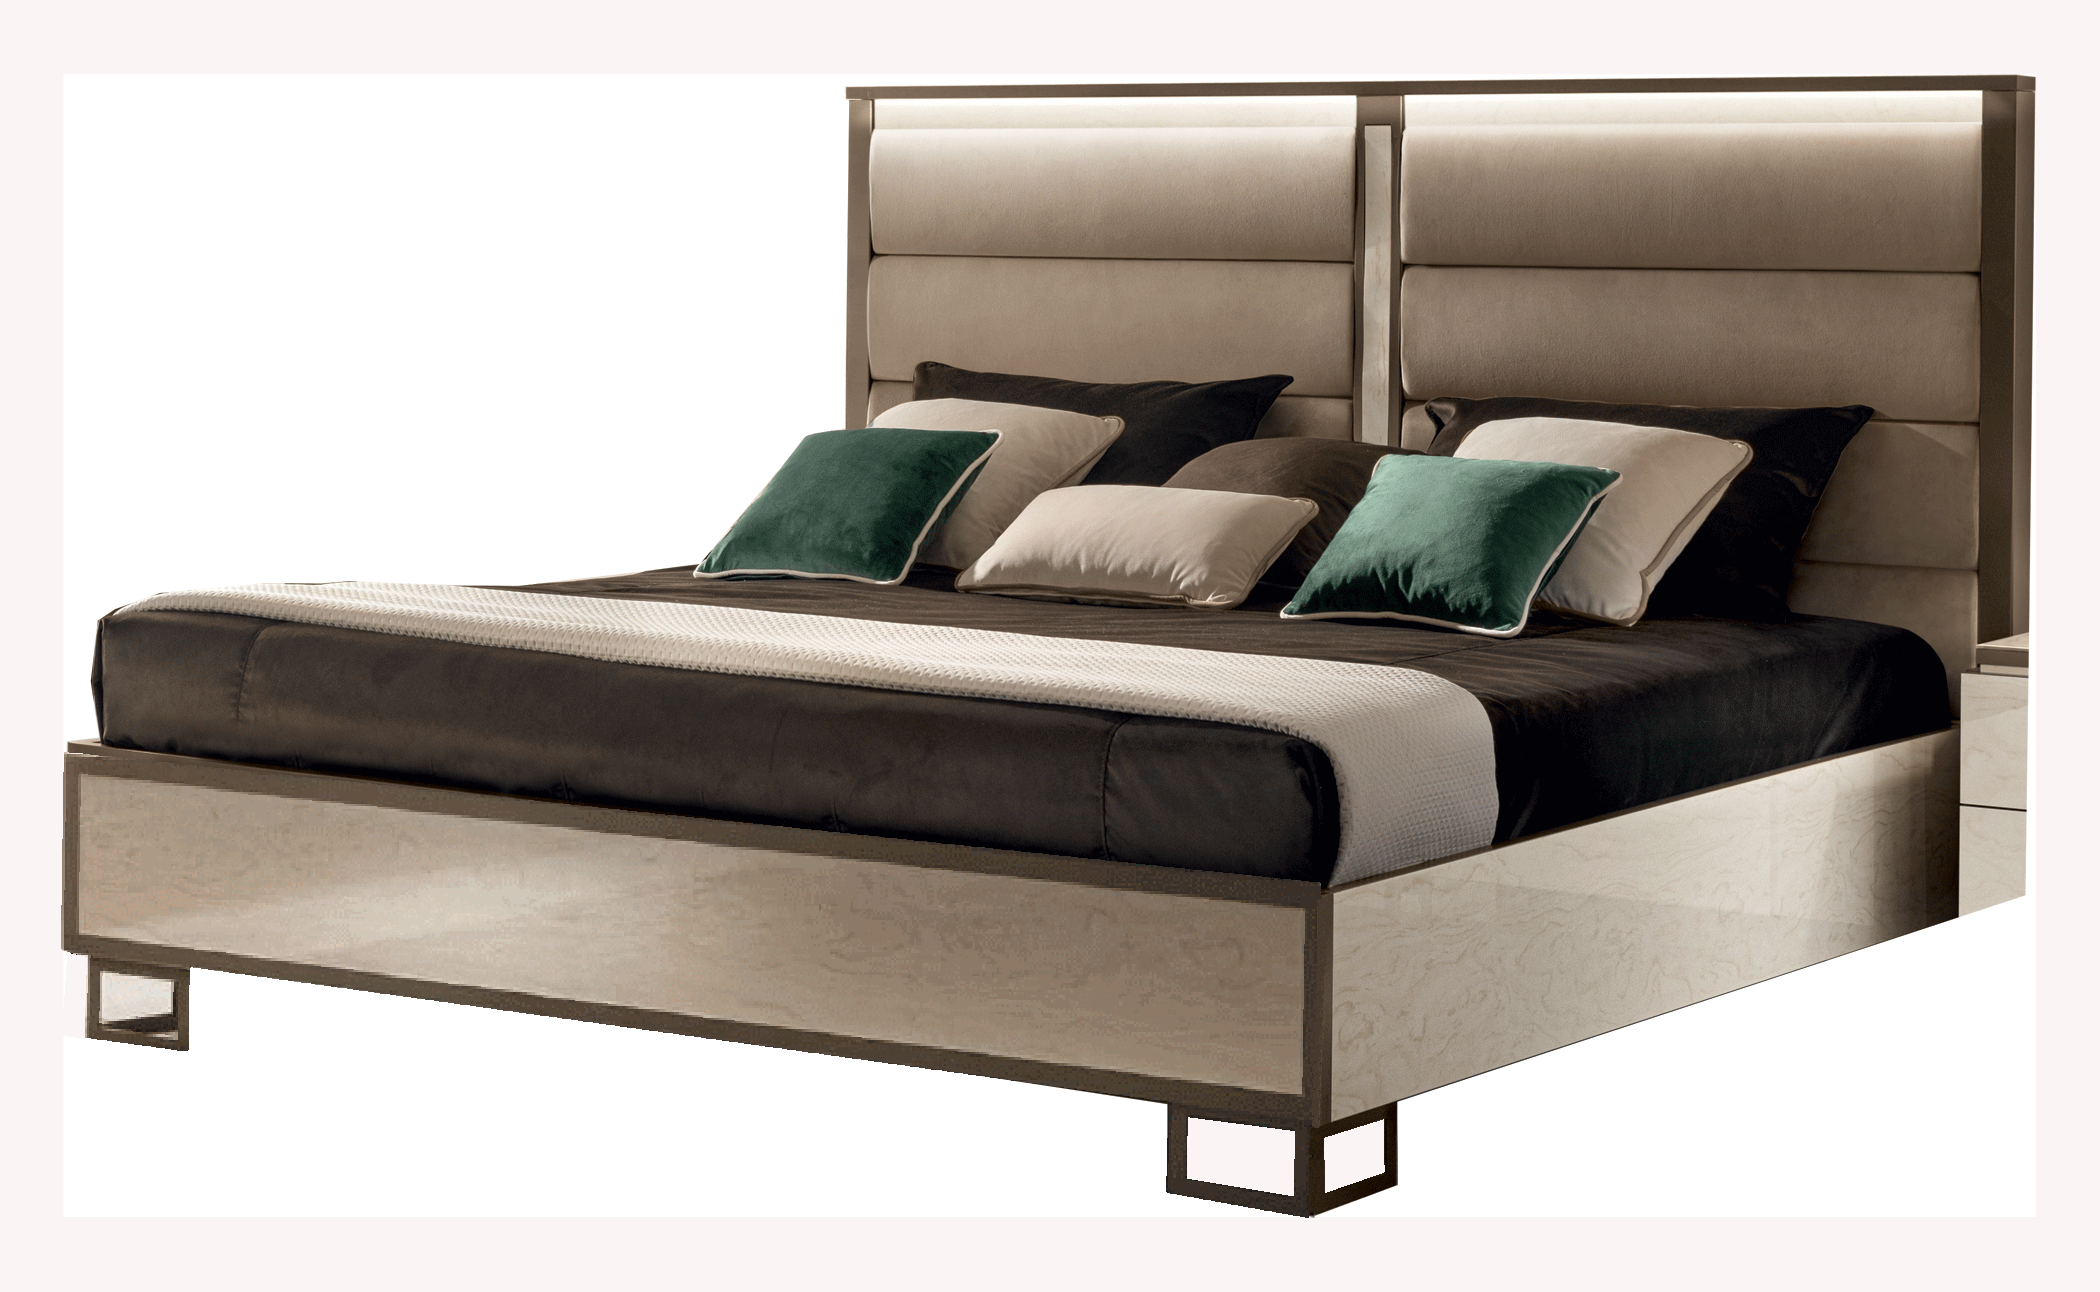 Brands Arredoclassic Dining Room, Italy Poesia Bed